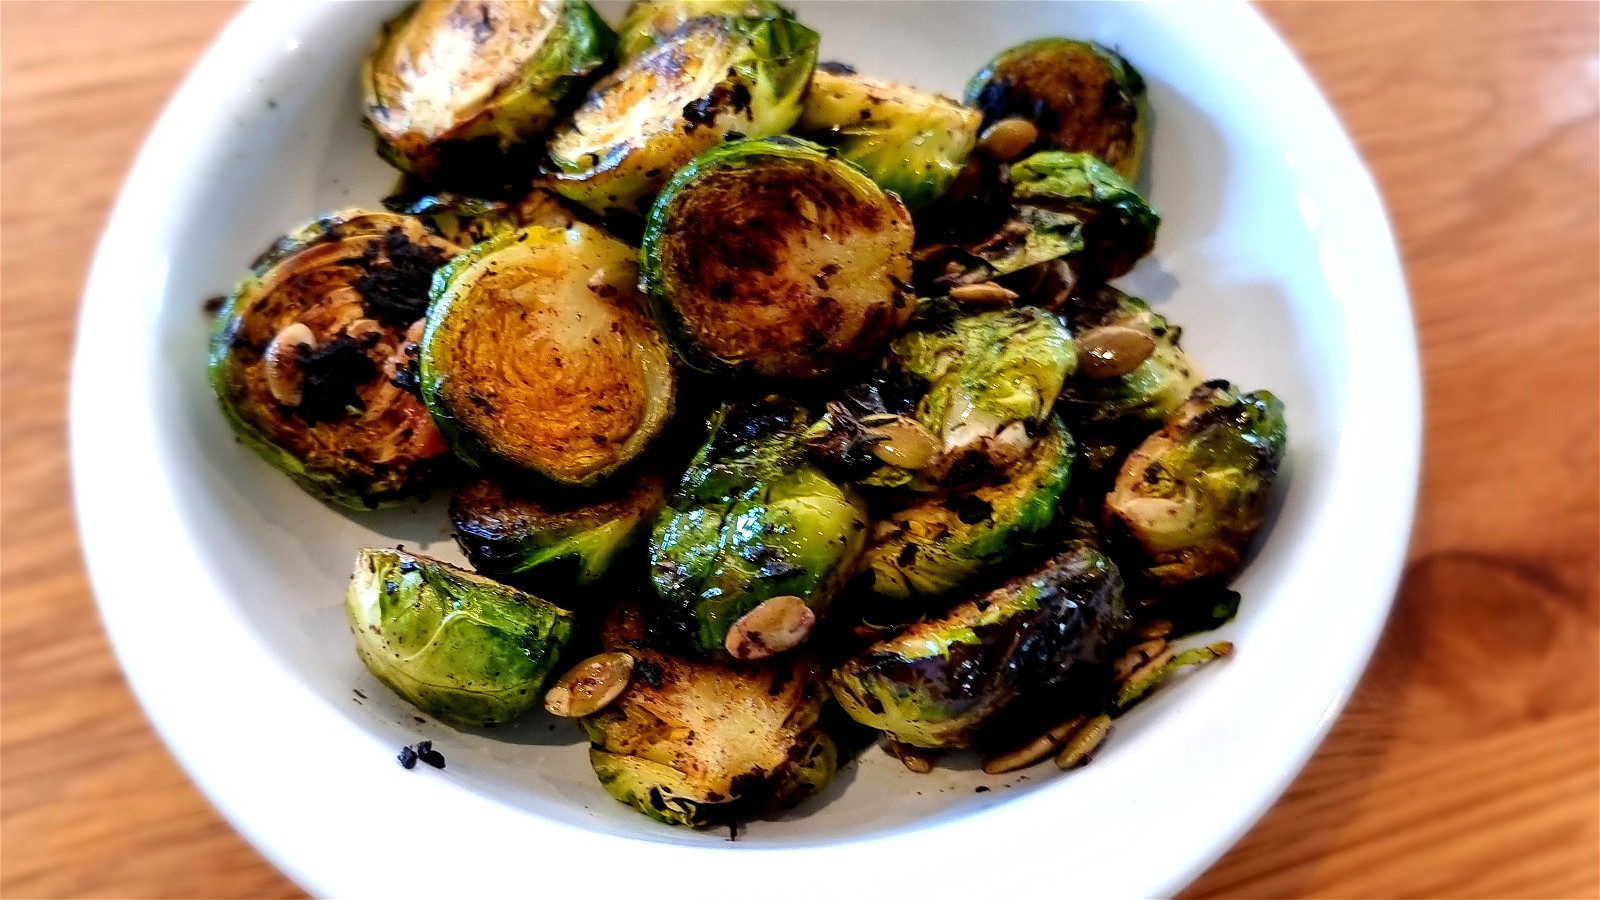 Image of Charred Brussel Sprouts with Black Garlic Puree